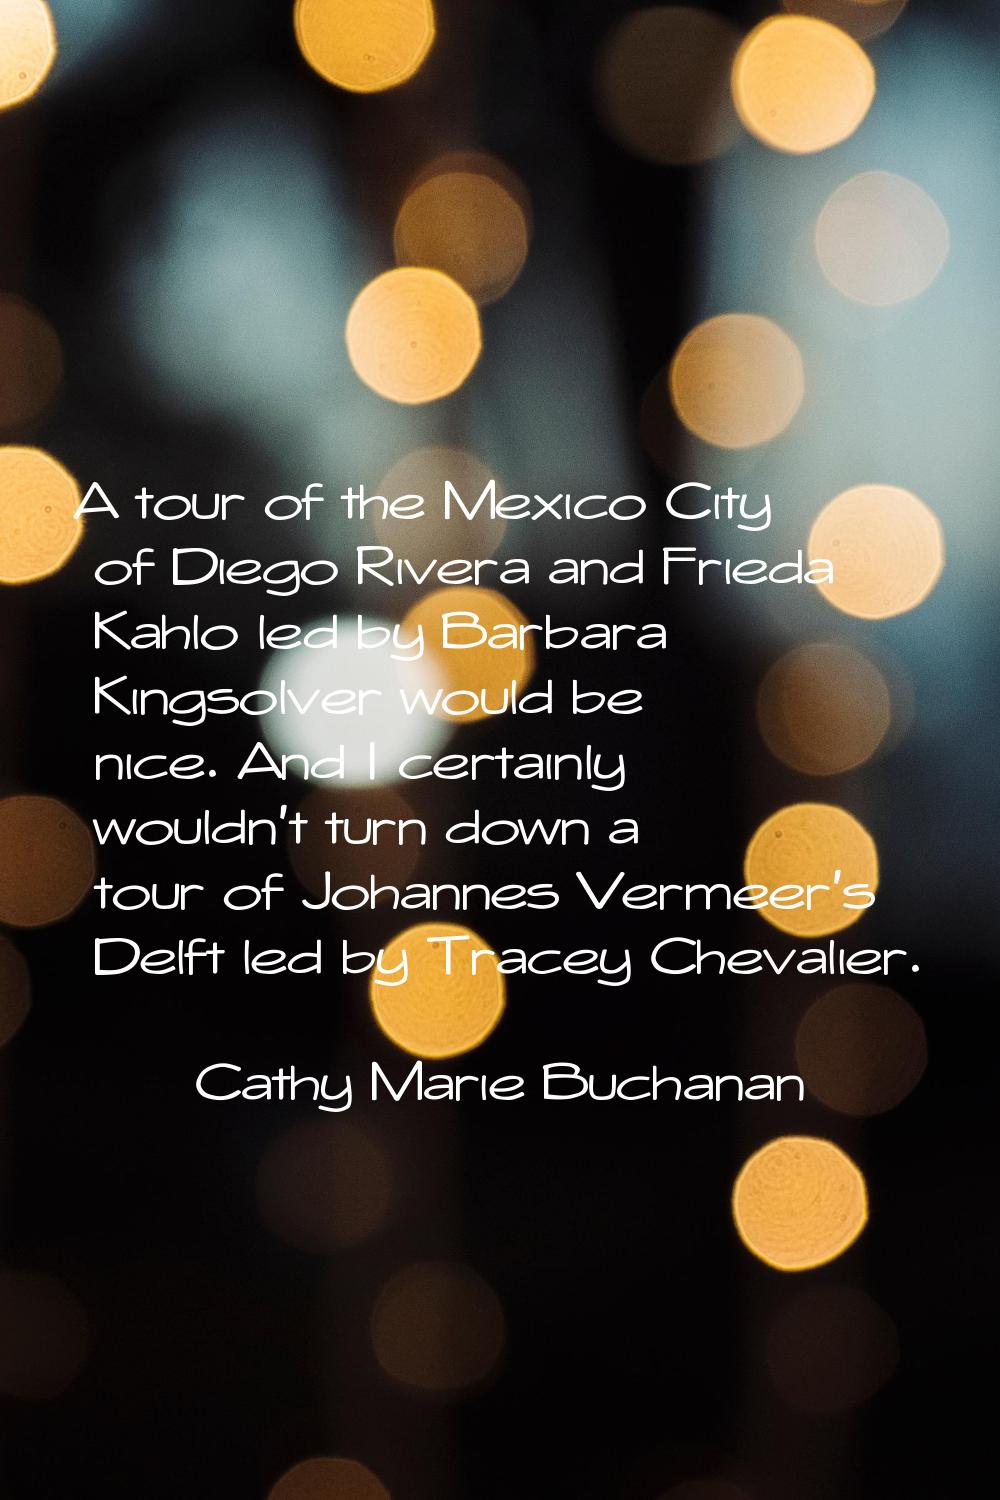 A tour of the Mexico City of Diego Rivera and Frieda Kahlo led by Barbara Kingsolver would be nice.